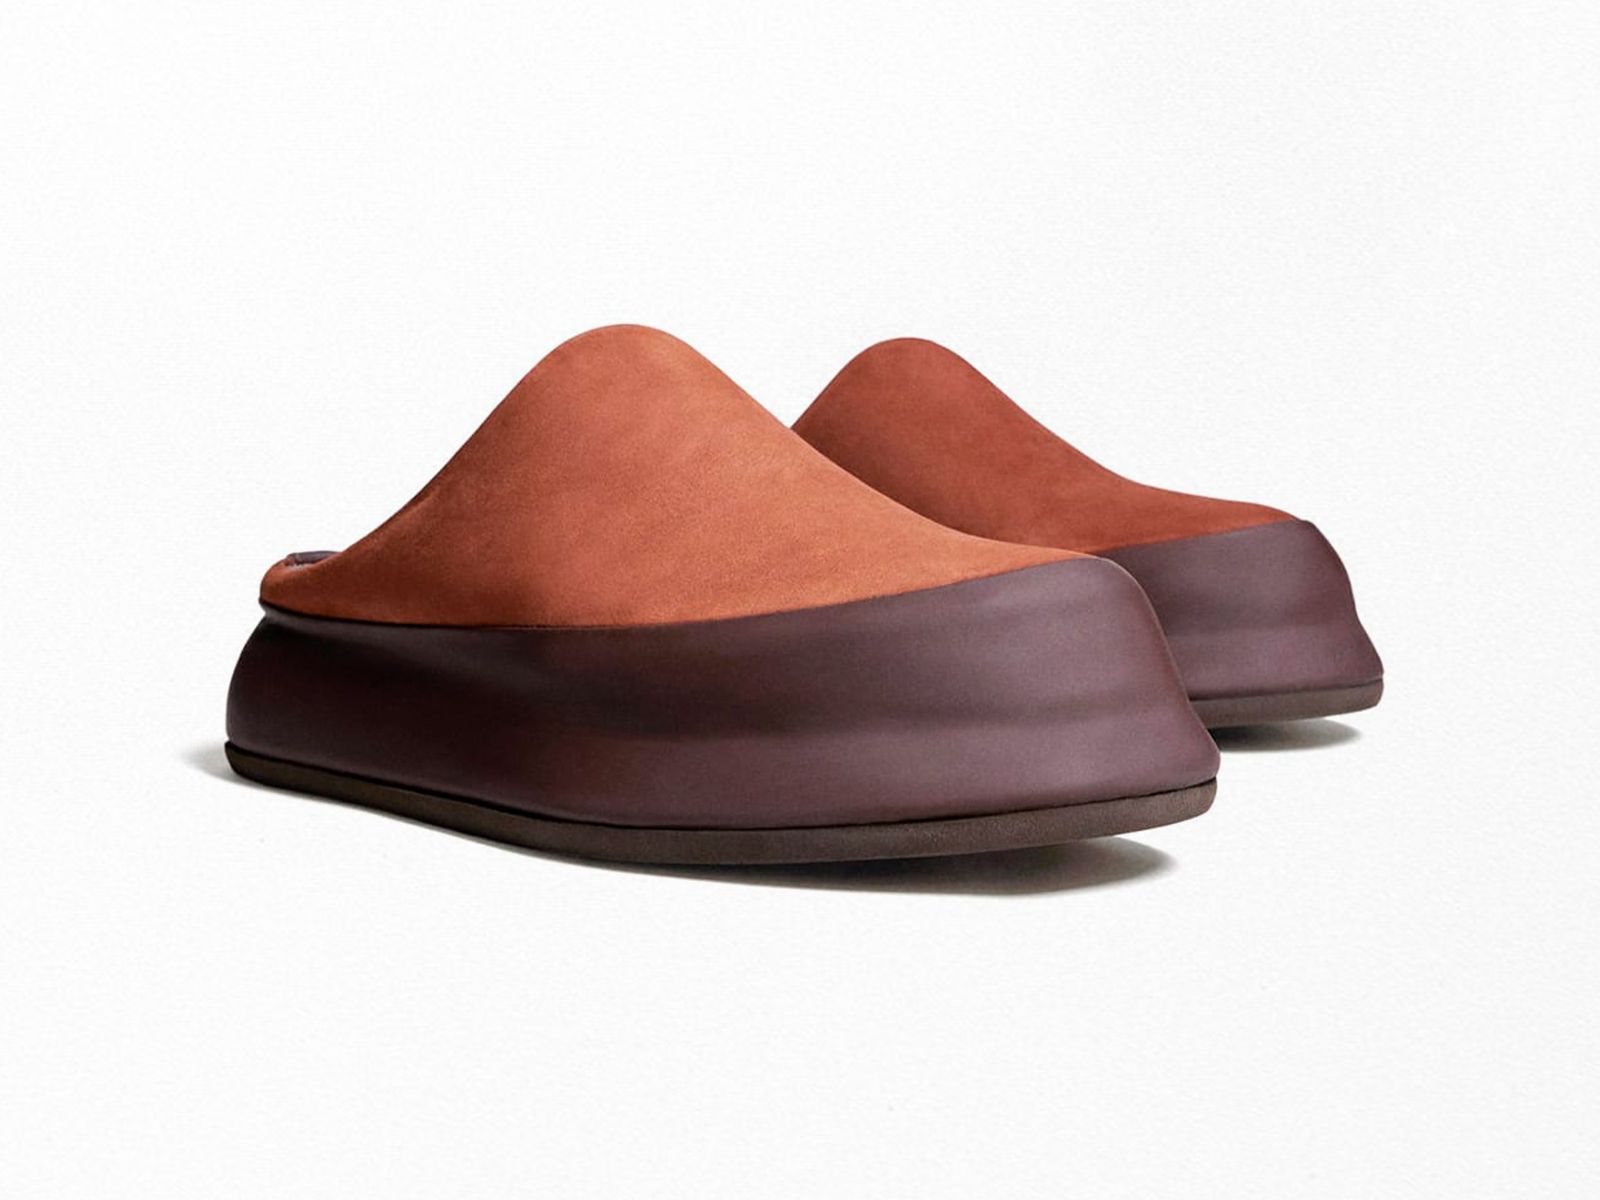 Jacquemus’ ‘Goia’ mules arrive just in time for spring